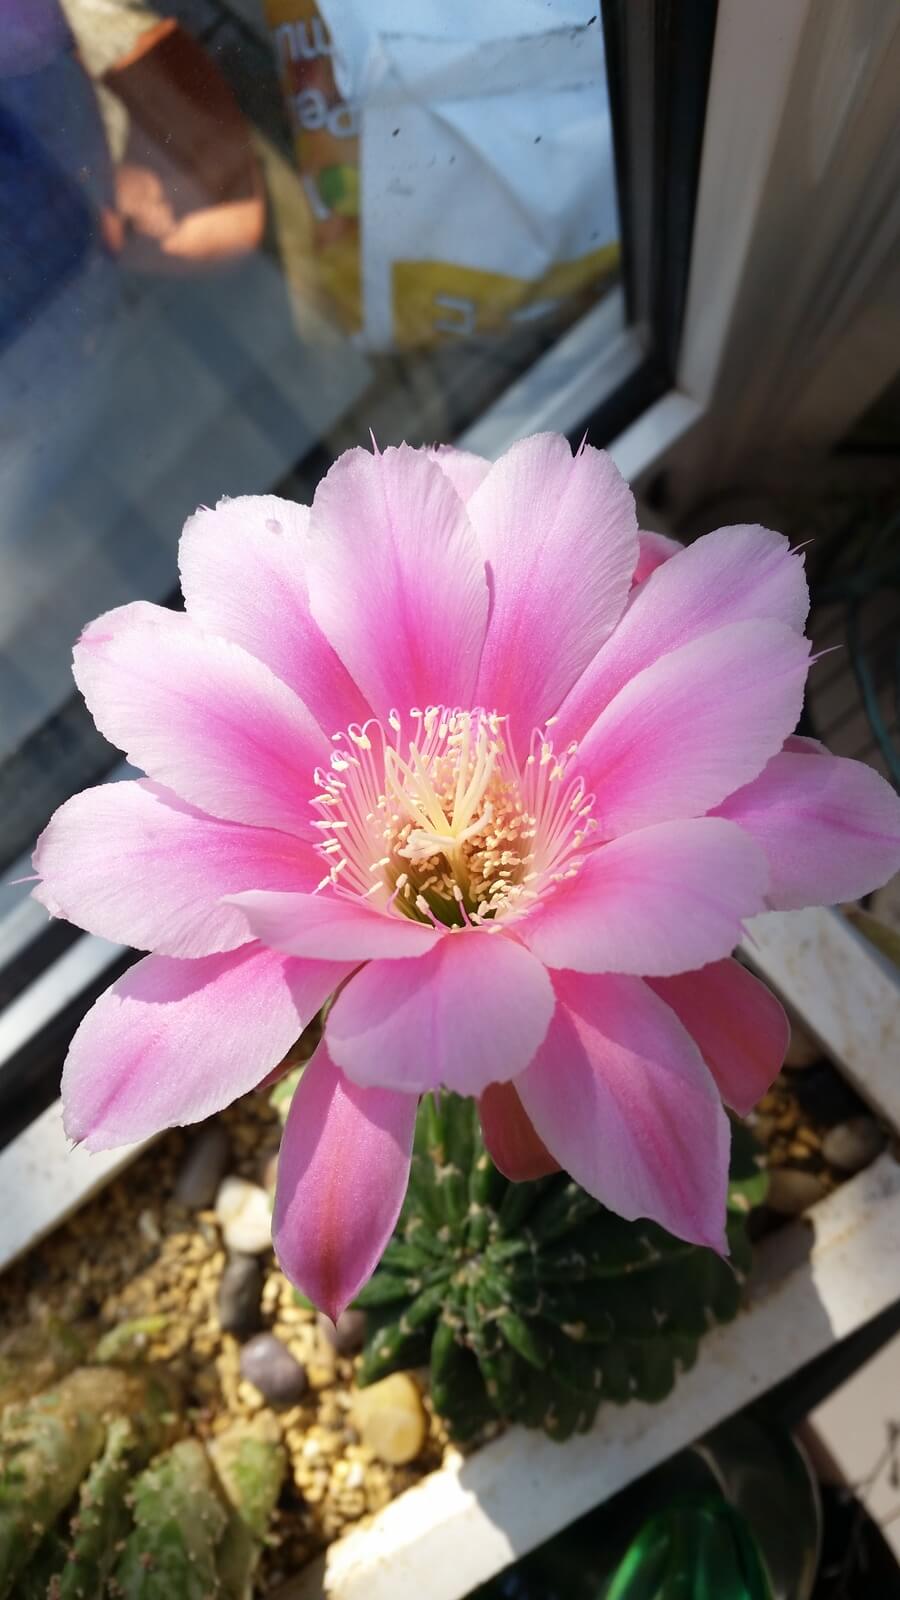 Nancy's Garden said that this Cacli only bloomed for one day - we are very happy that she caught it on camera. 